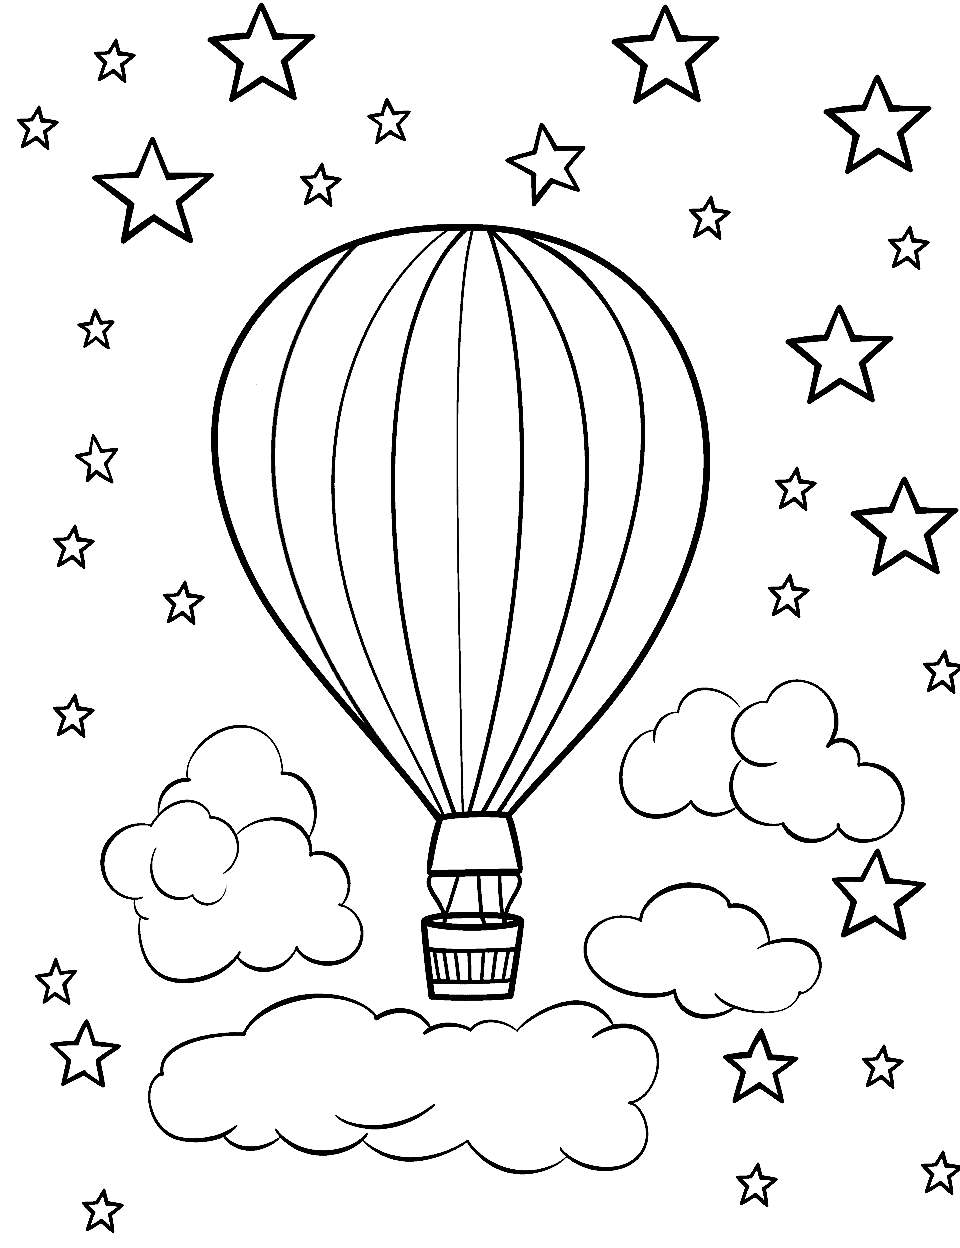 Star and Hot Air Balloon Coloring Page - A hot air balloon floating in a star-filled sky.